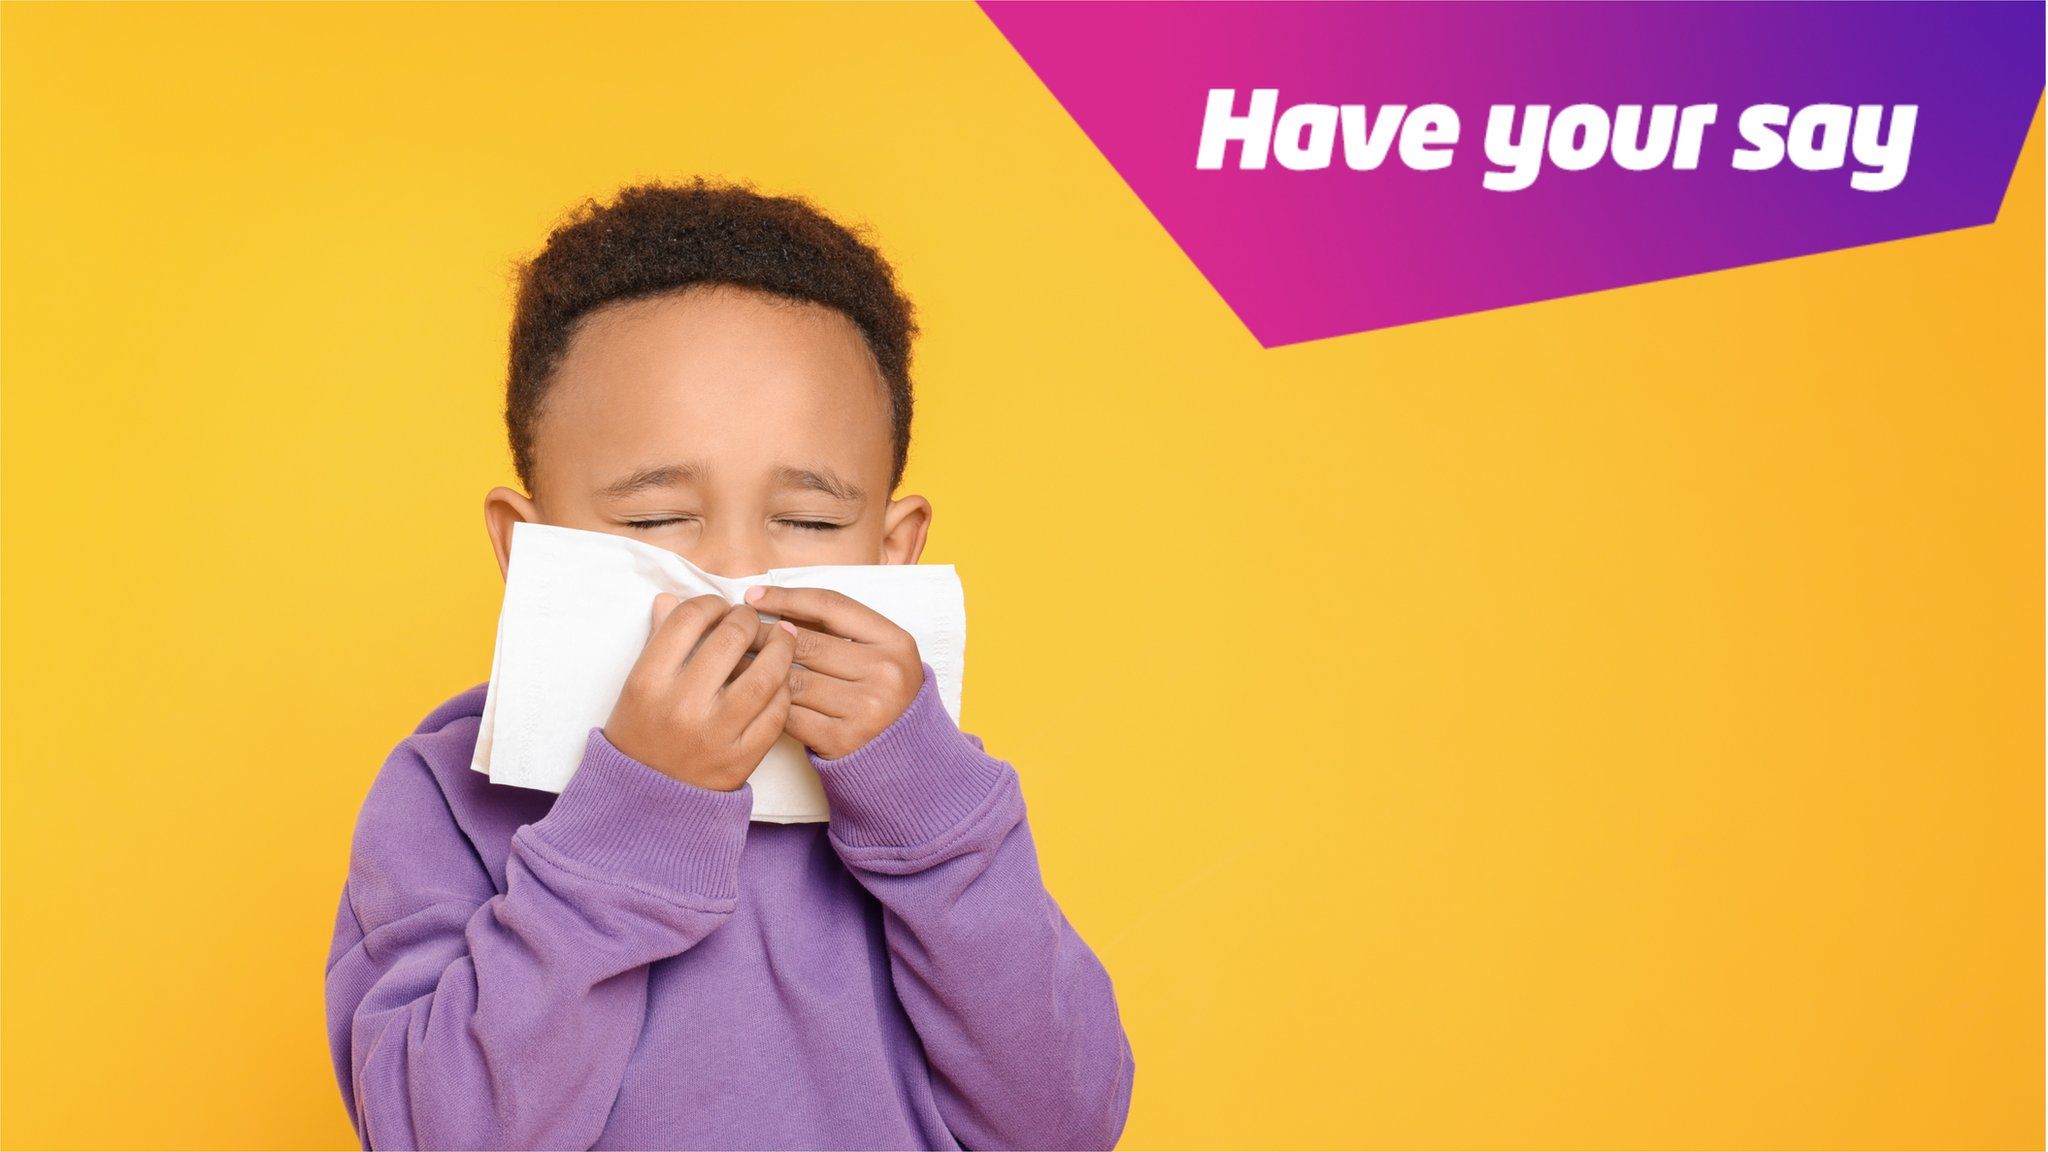 Child sneezing with a logo saying 'have your say' top right of the image.